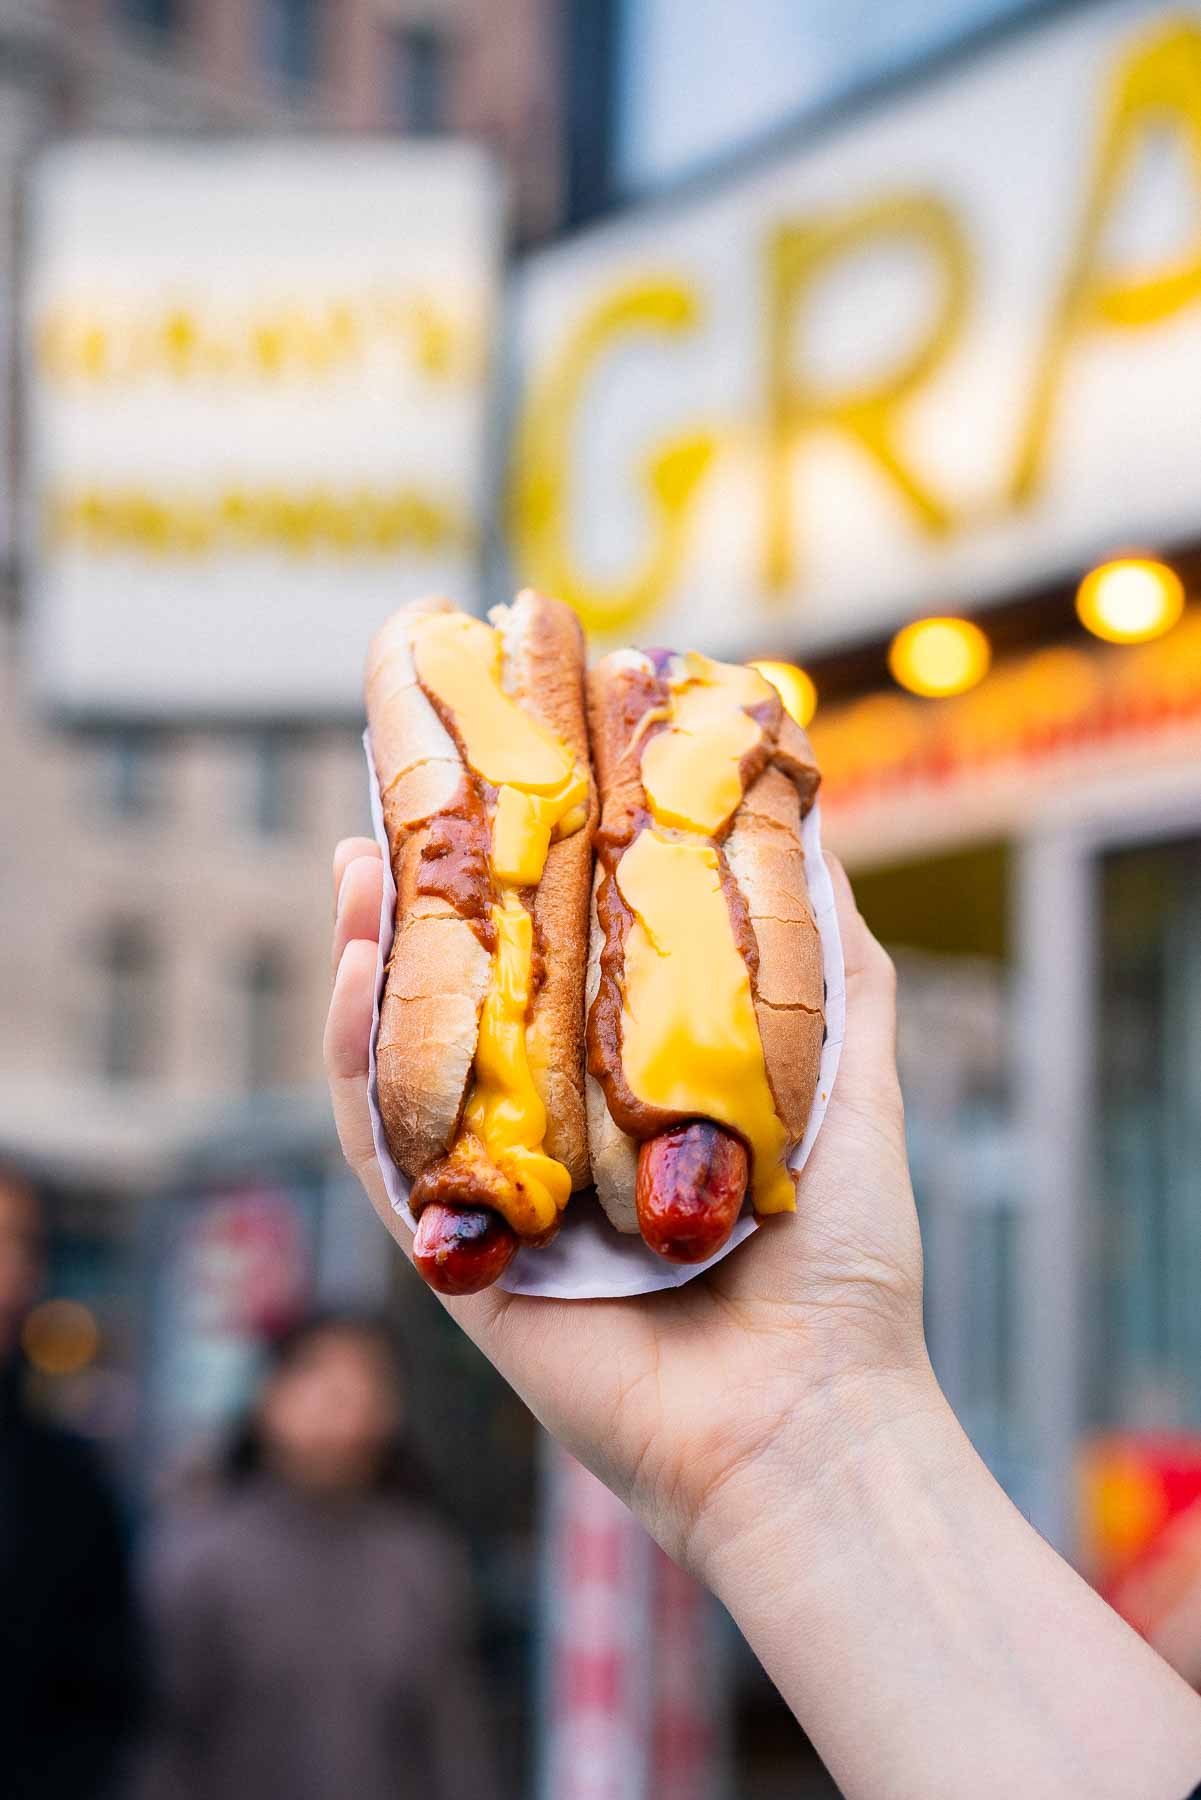 2 Chili Cheese Dogs from Grays Papaya in the Upper West Side, Best Hot Dogs in NYC